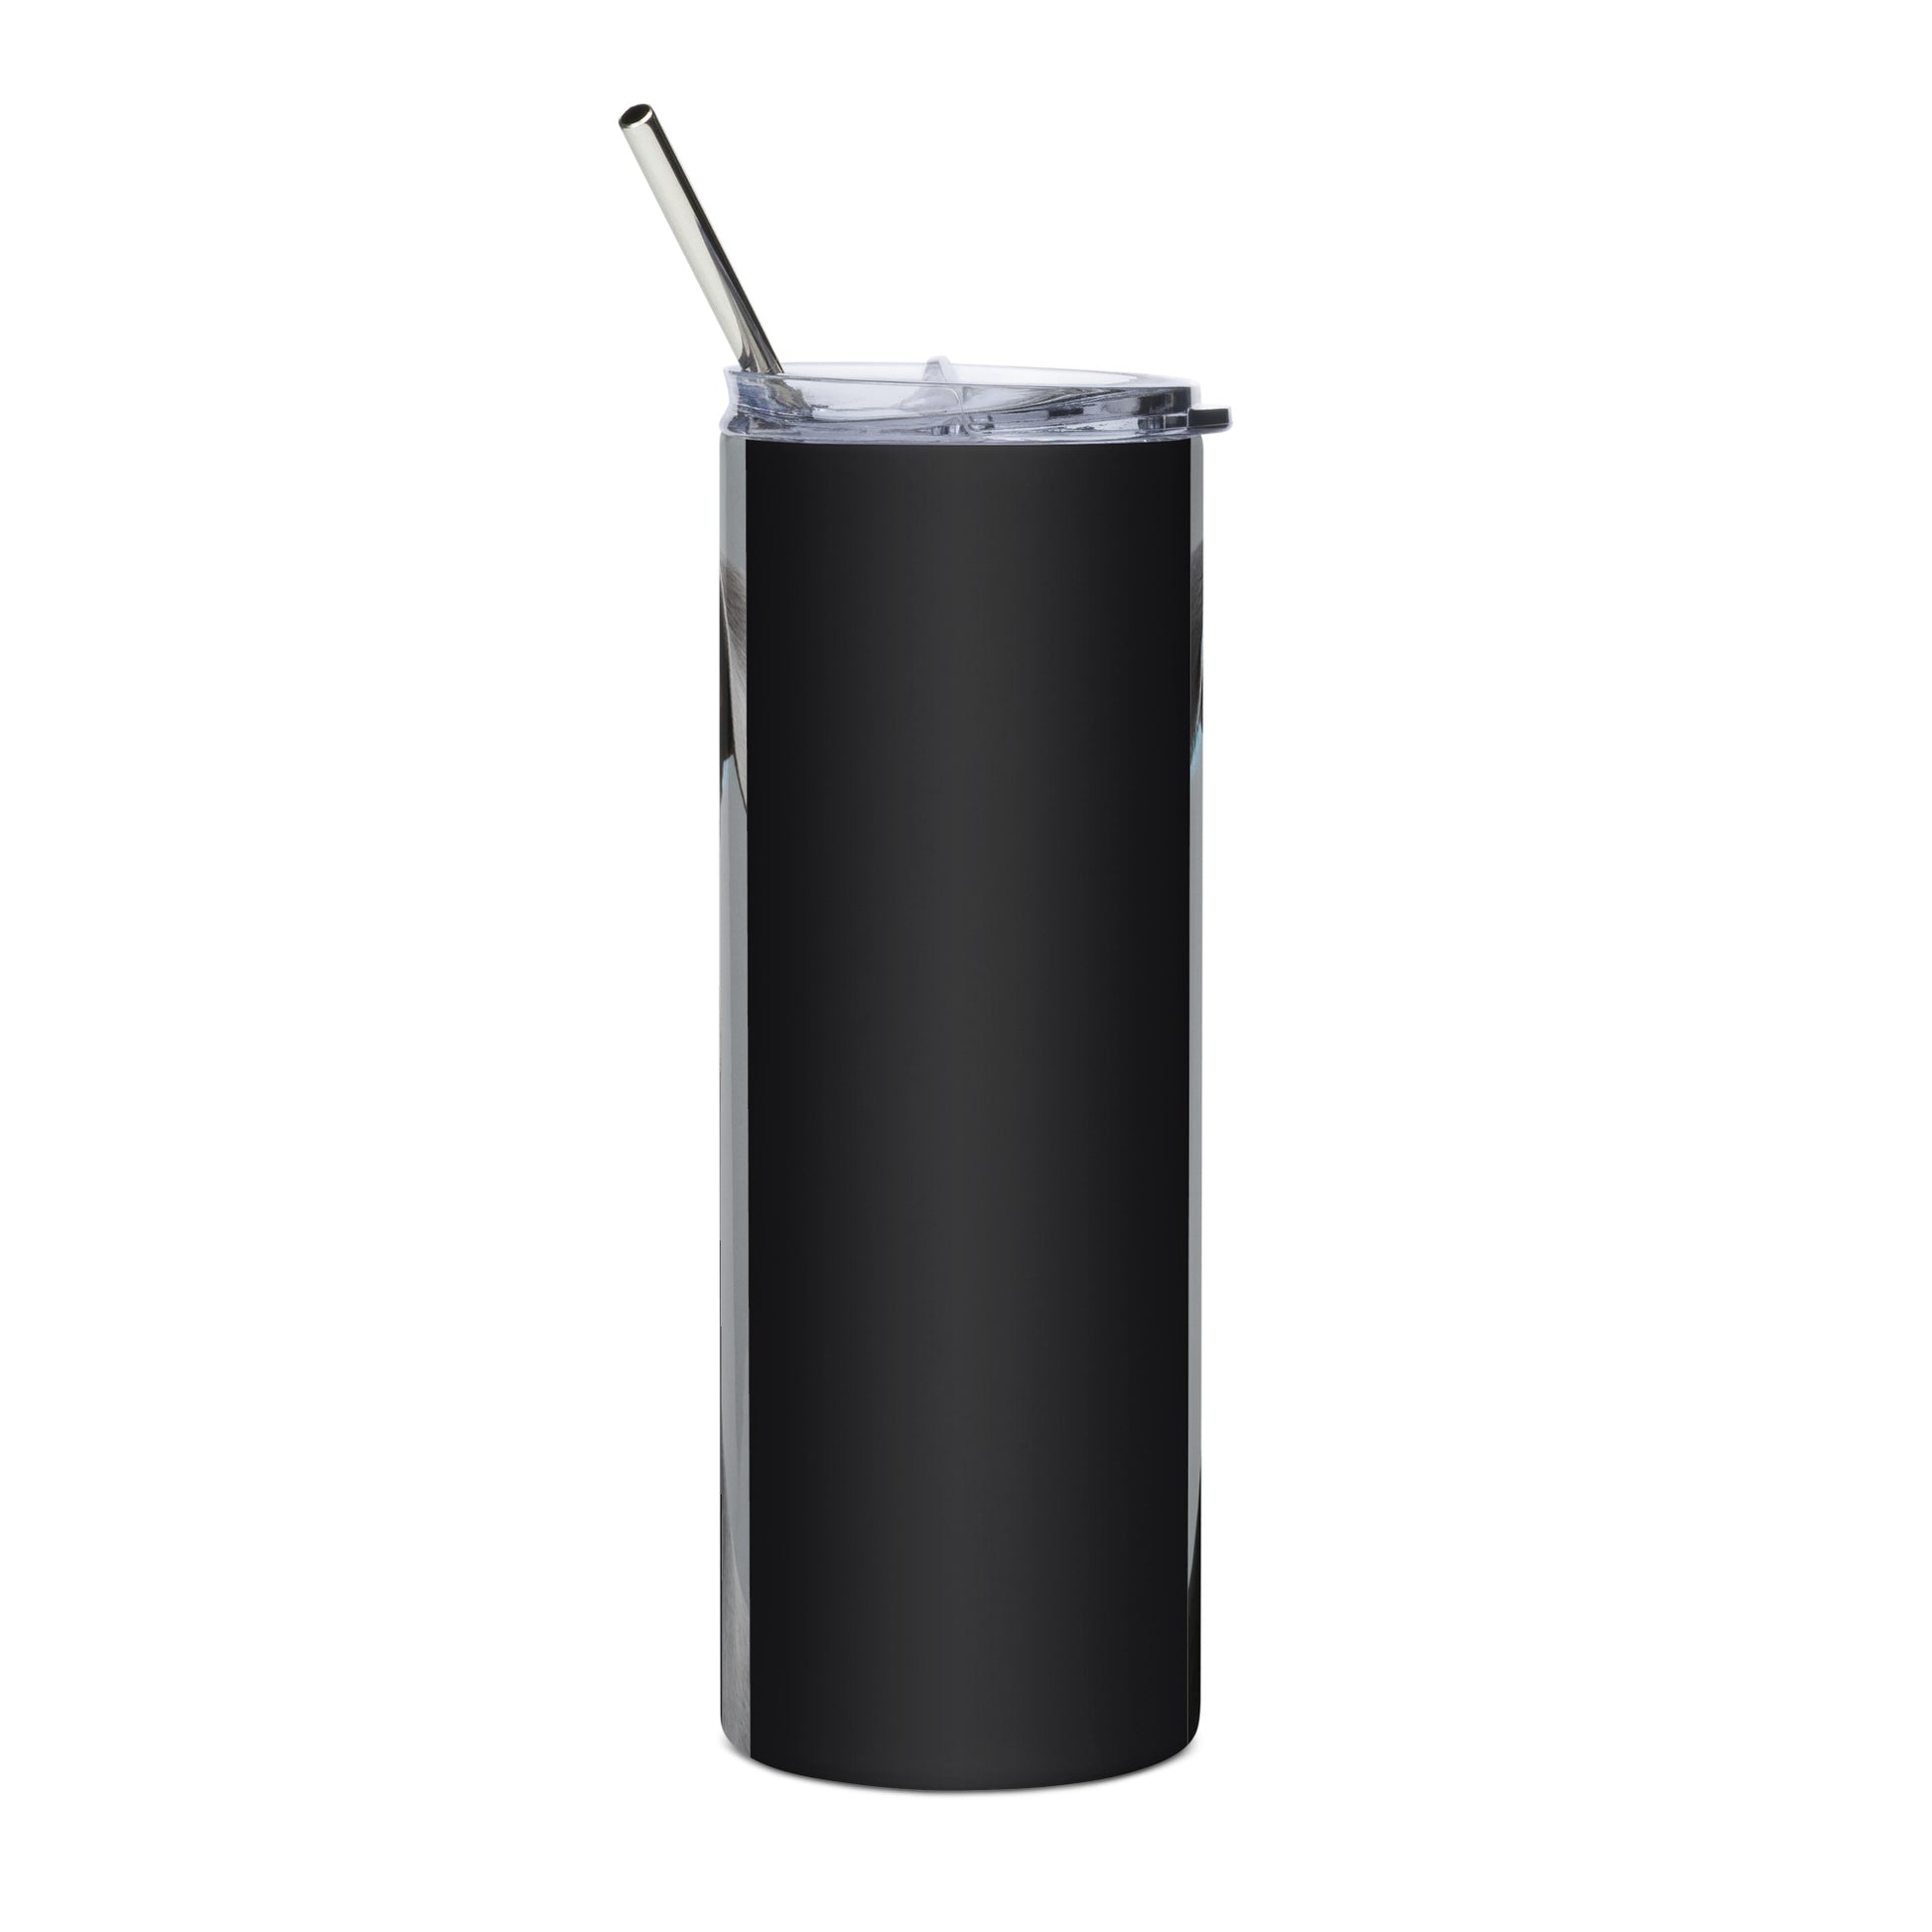 Pitbull Stainless steel tumbler - Readable Apparel